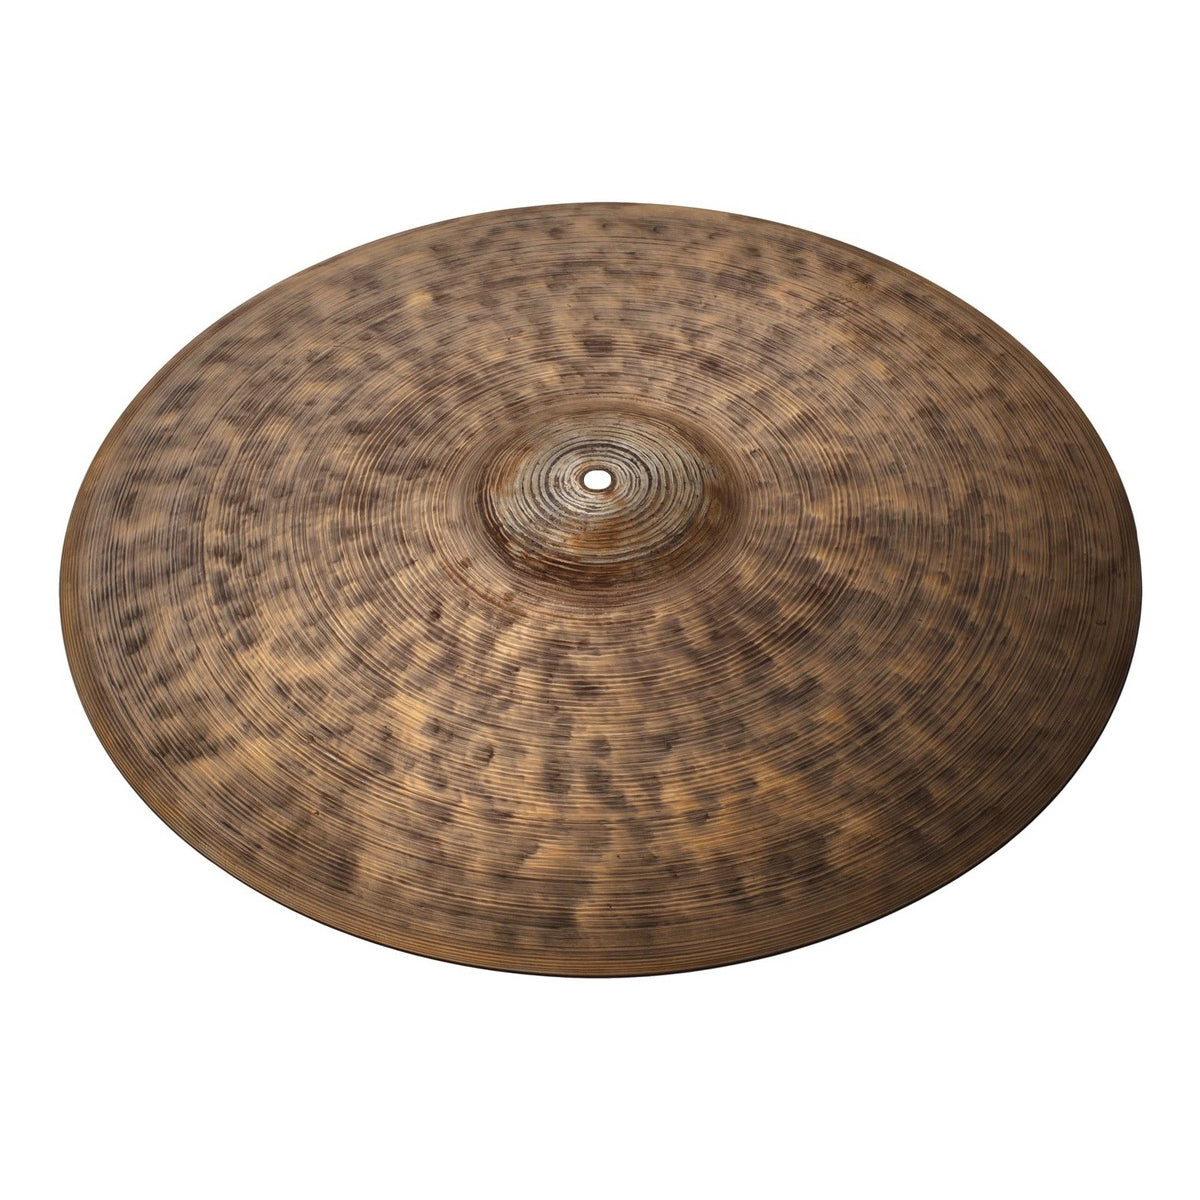 Istanbul Agop 30th Anniversary 22" Ride